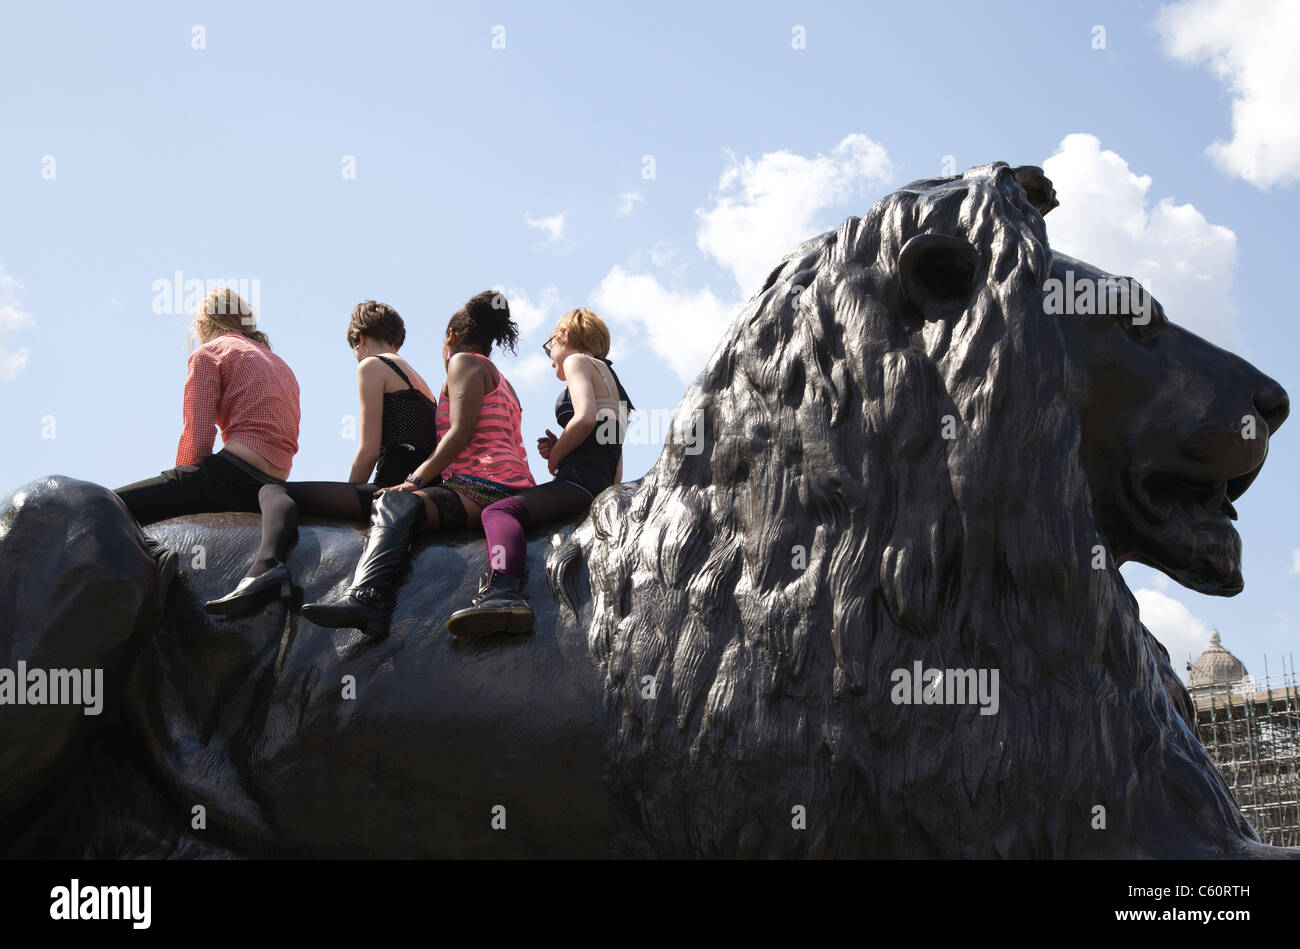 Four anonymous children sit on the back of a lion statue in London's Trafalgar Square Stock Photo